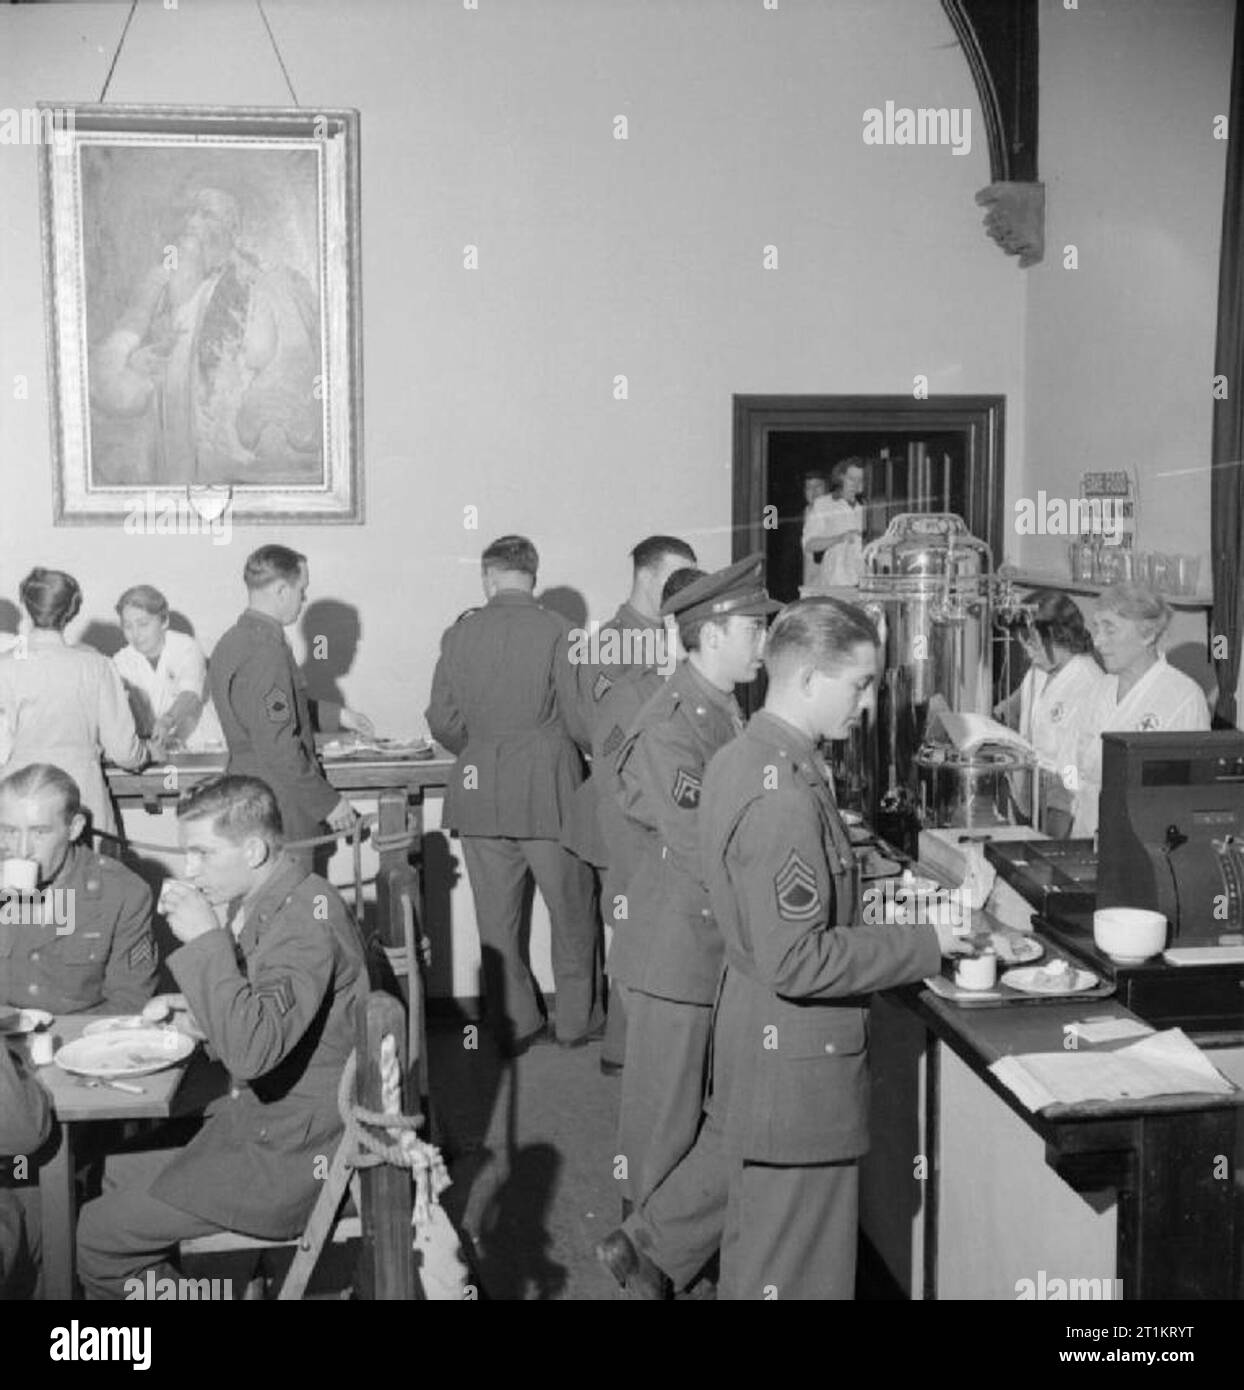 American Red Cross Service Club, Norwich- Life at the Club at the Bishop's Palace, Norfolk, England, UK, 1943 American service personnel queue along the counter of the buffet which lines the walls of the cafeteria at the American Red Cross Service Club. The room was previously the dining room in the Bishop's Palace. British staff, both paid and volunteer, serve meals to the men. According to the original caption, hot food, sandwiches, tea, coffee and coca-cola is always available, day and night, and Bishop Herbert calls into the cafeteria every day for his morning coffee. Stock Photo